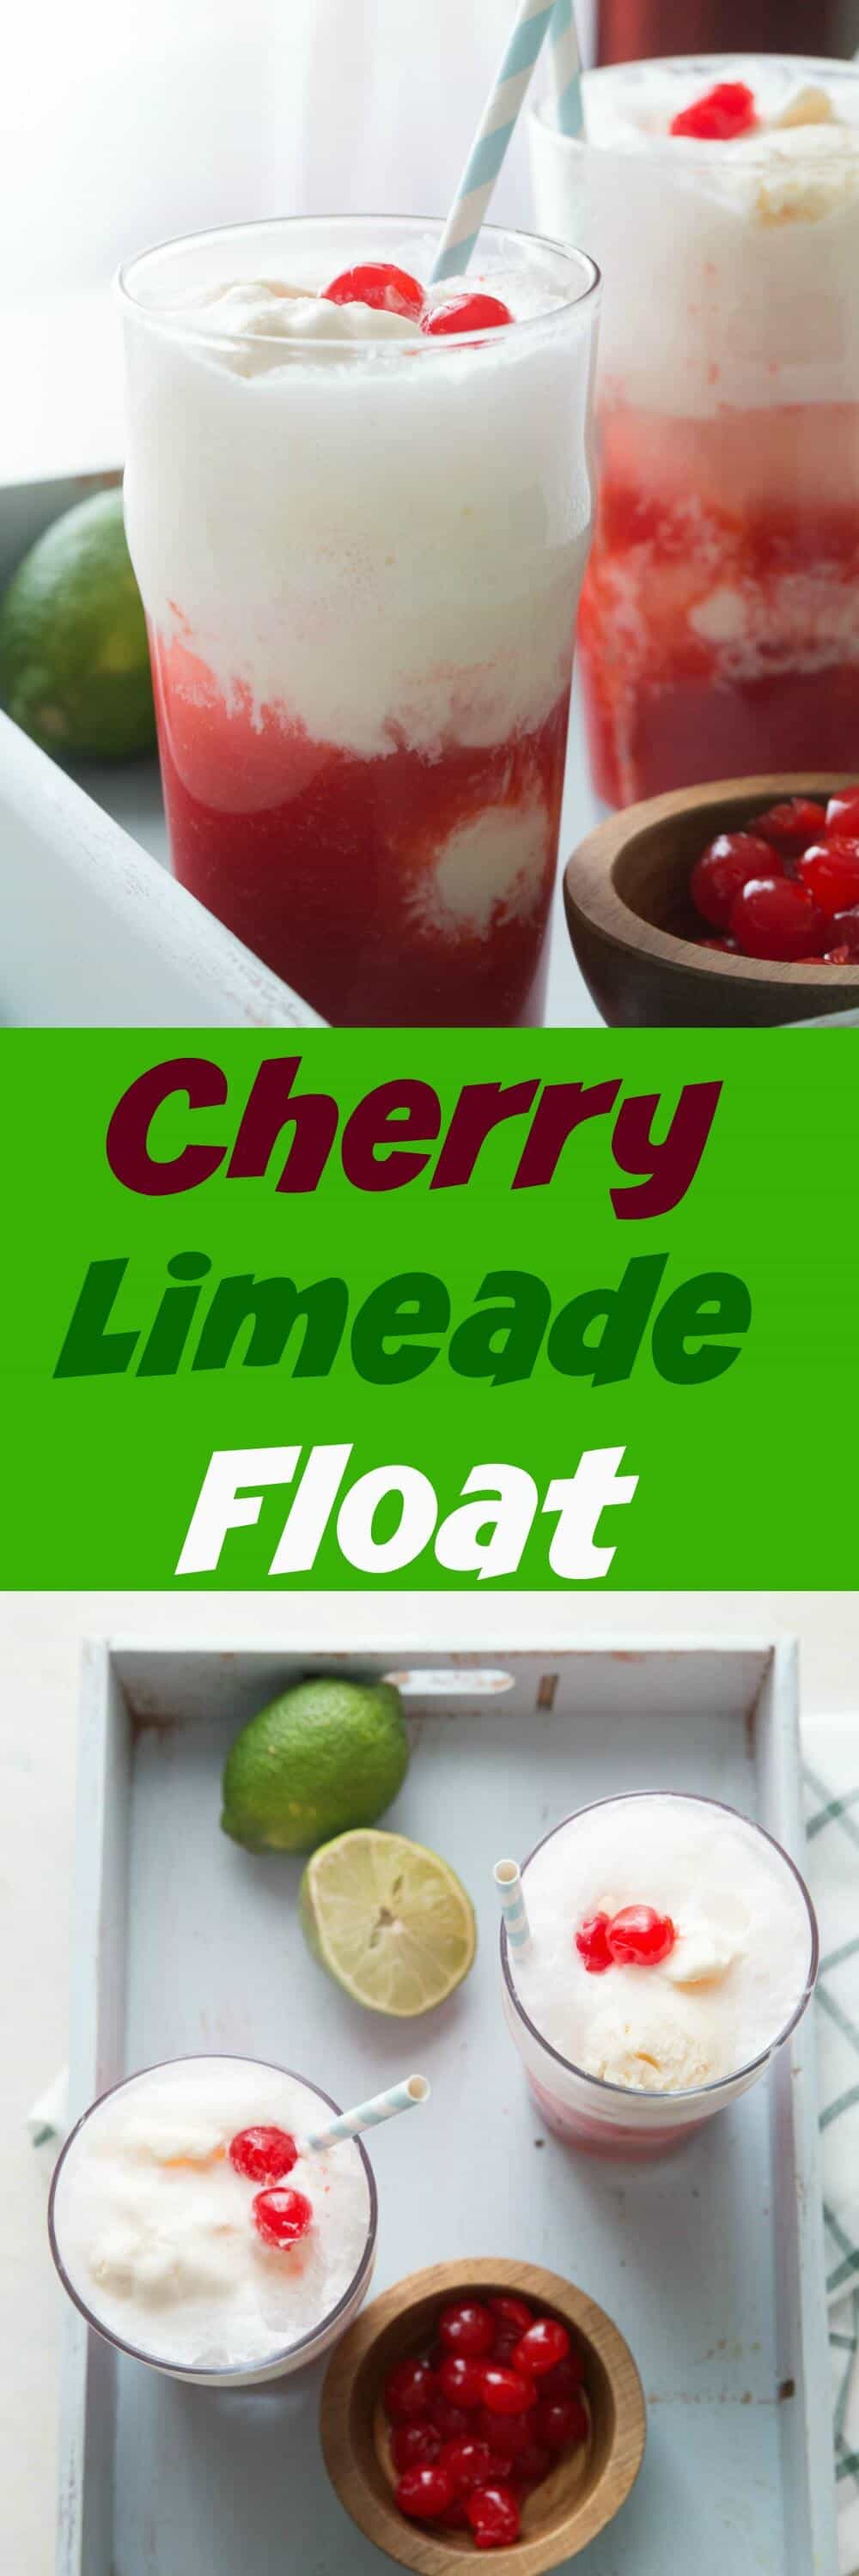 Ice cream floats are so fun!  Kids and adults are both going to love this sweet and tangy cherry limeade float!